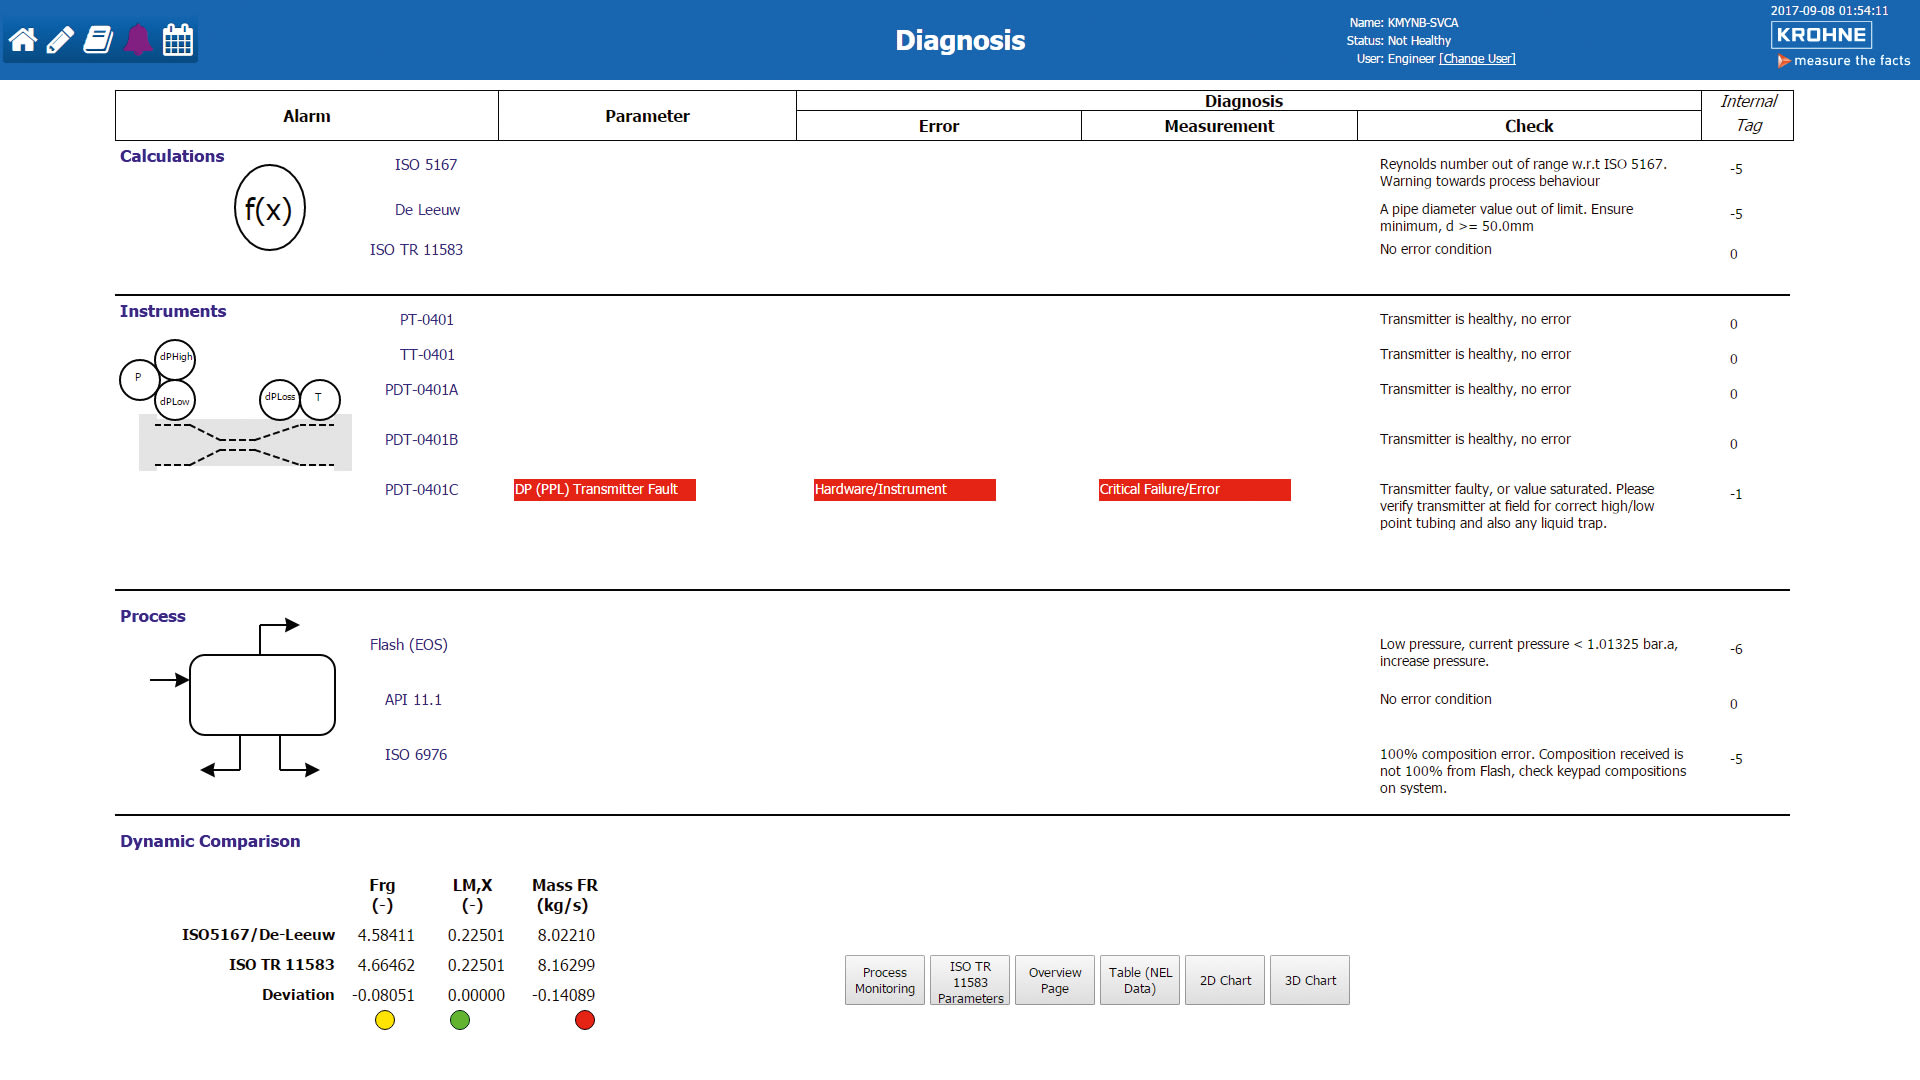 Typical WGS diagnostics screen with alarms showing areas of concern within the system, from well to calculation cycle